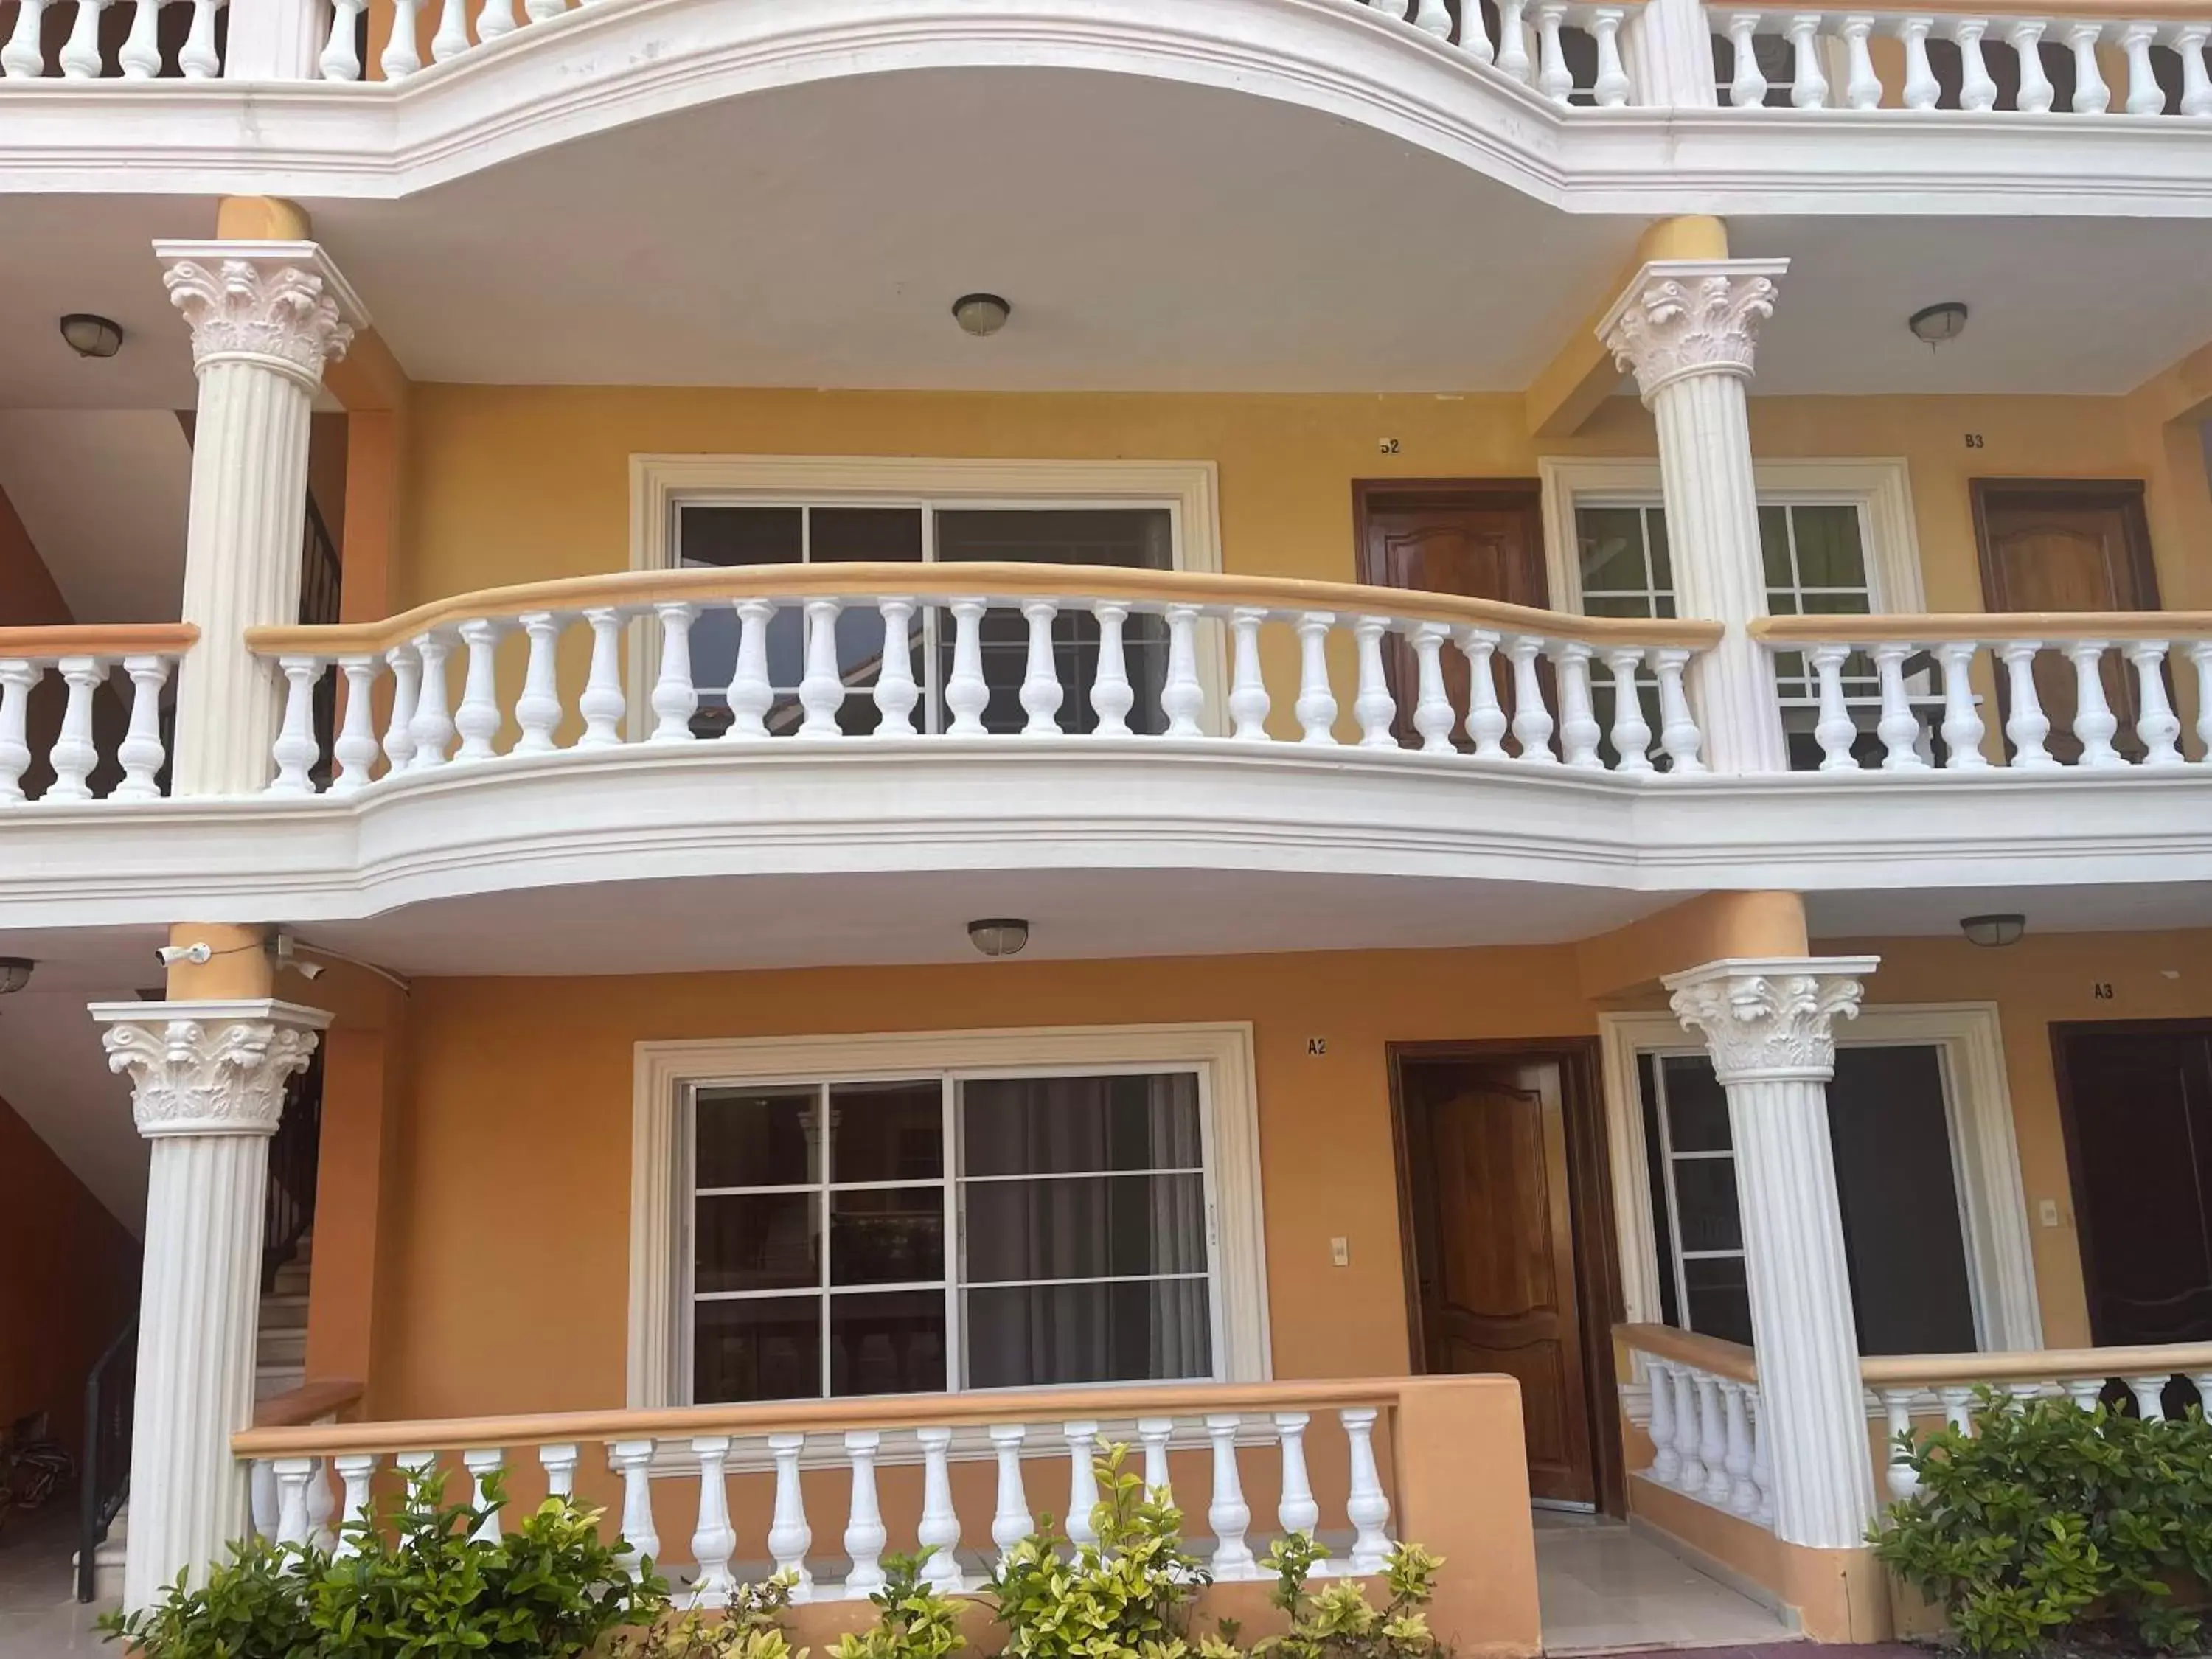 Property Building in Yonah comfort punta cana, shared apartment